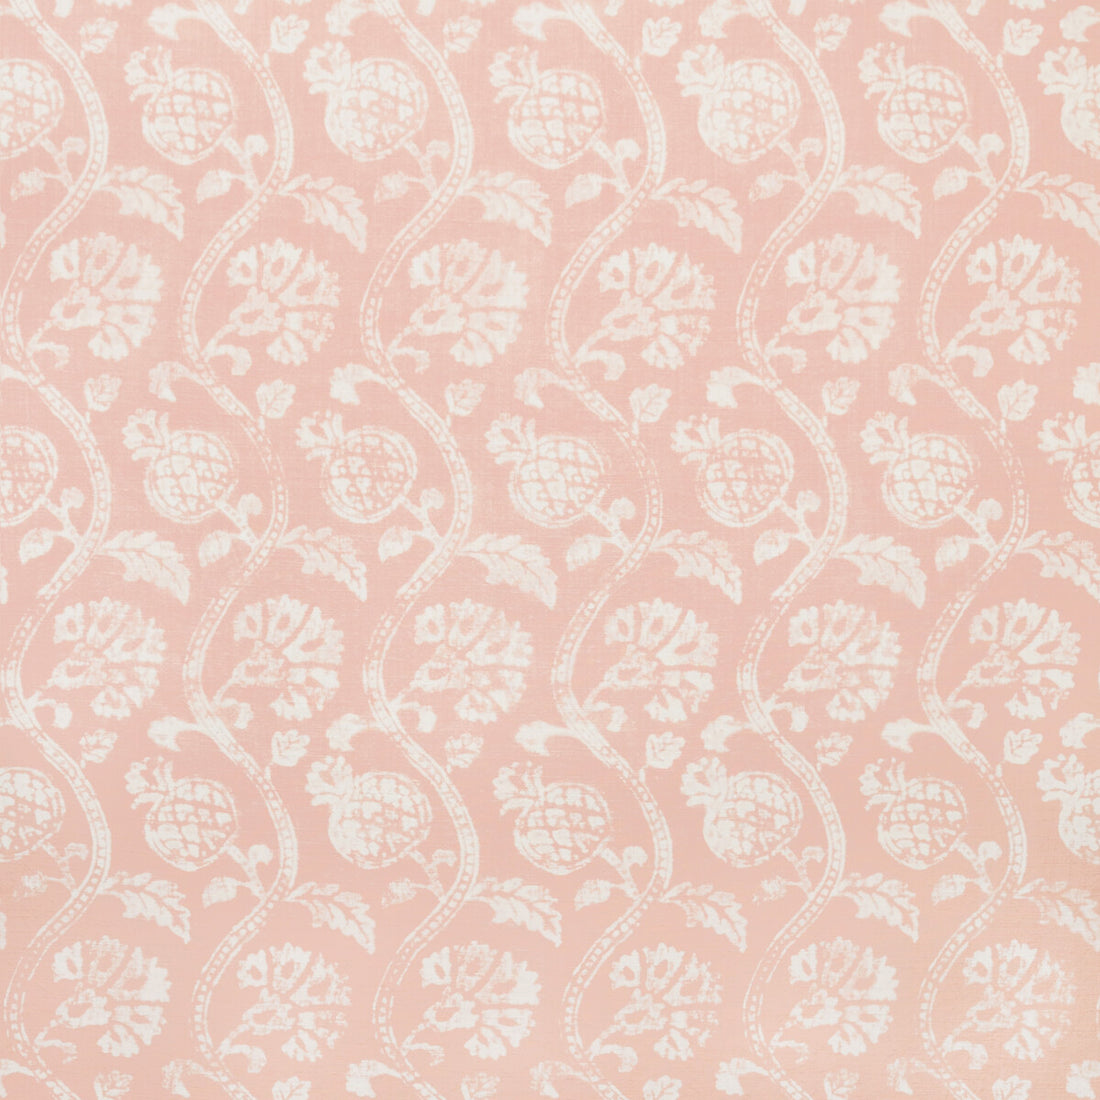 Amballa fabric in blush color - pattern AMBALLA.17.0 - by Kravet Basics in the Ceylon collection